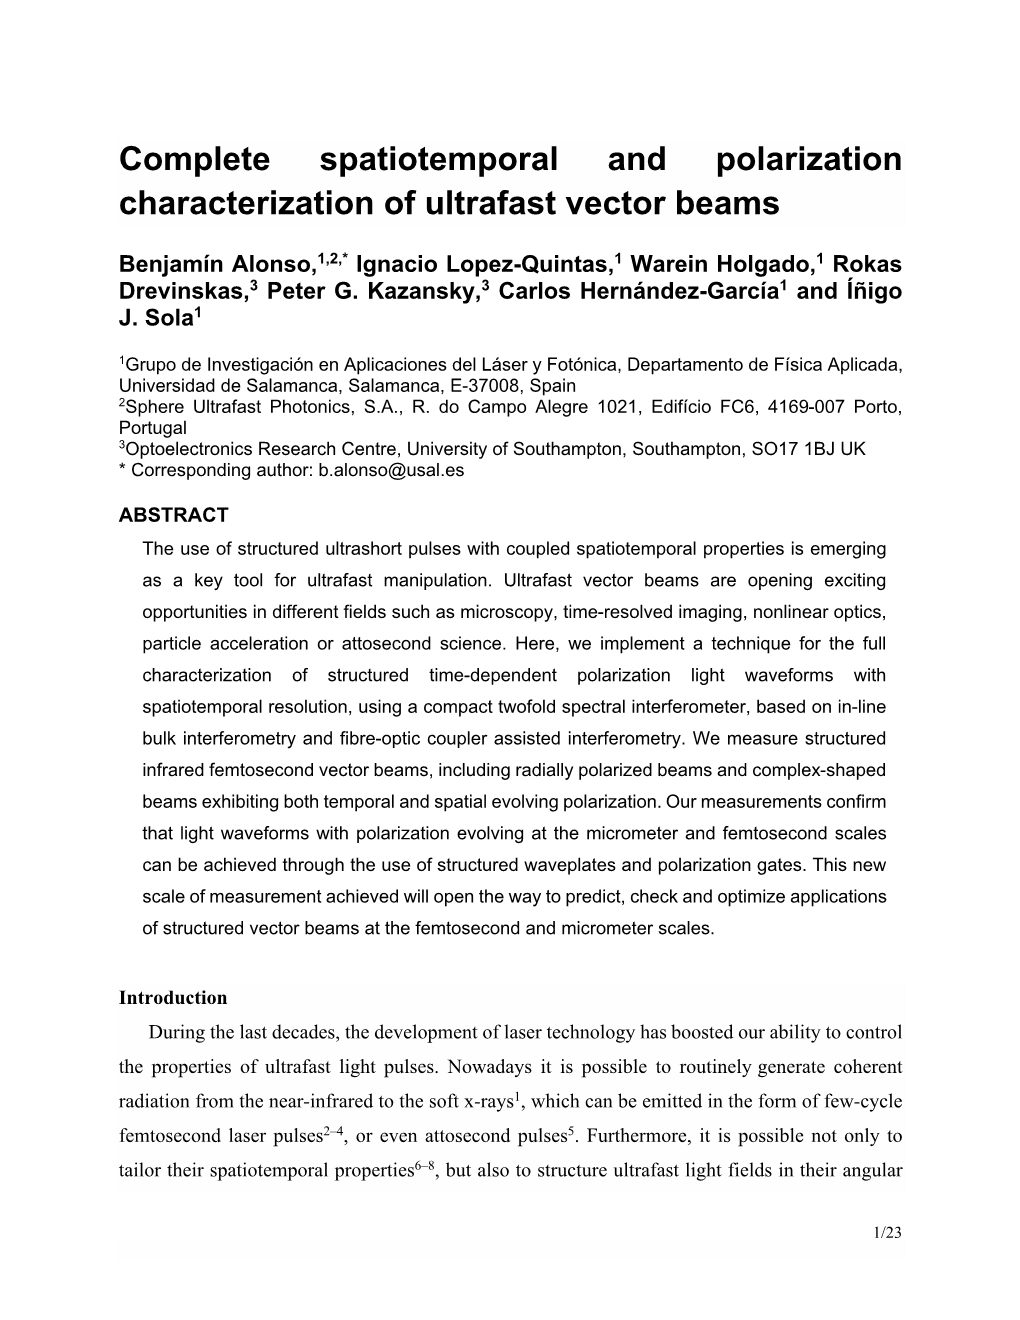 Complete Spatiotemporal and Polarization Characterization of Ultrafast Vector Beams